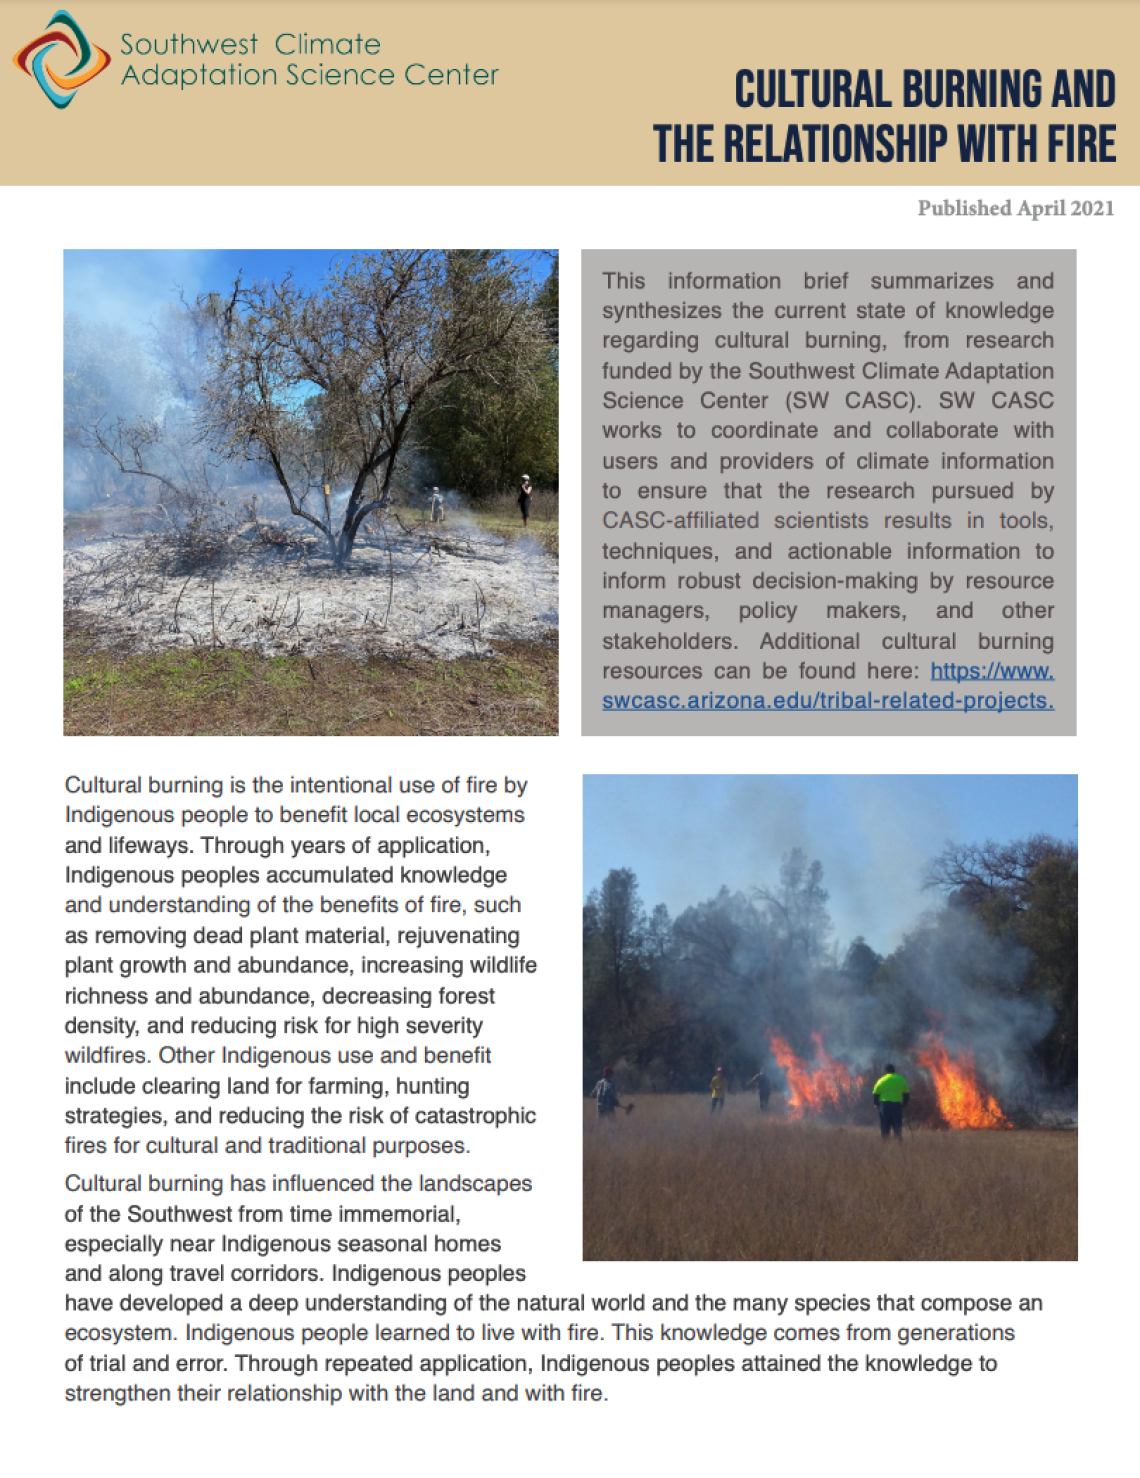 Screenshot of first page of Cultural Burning and the Relationship with Fire brief.